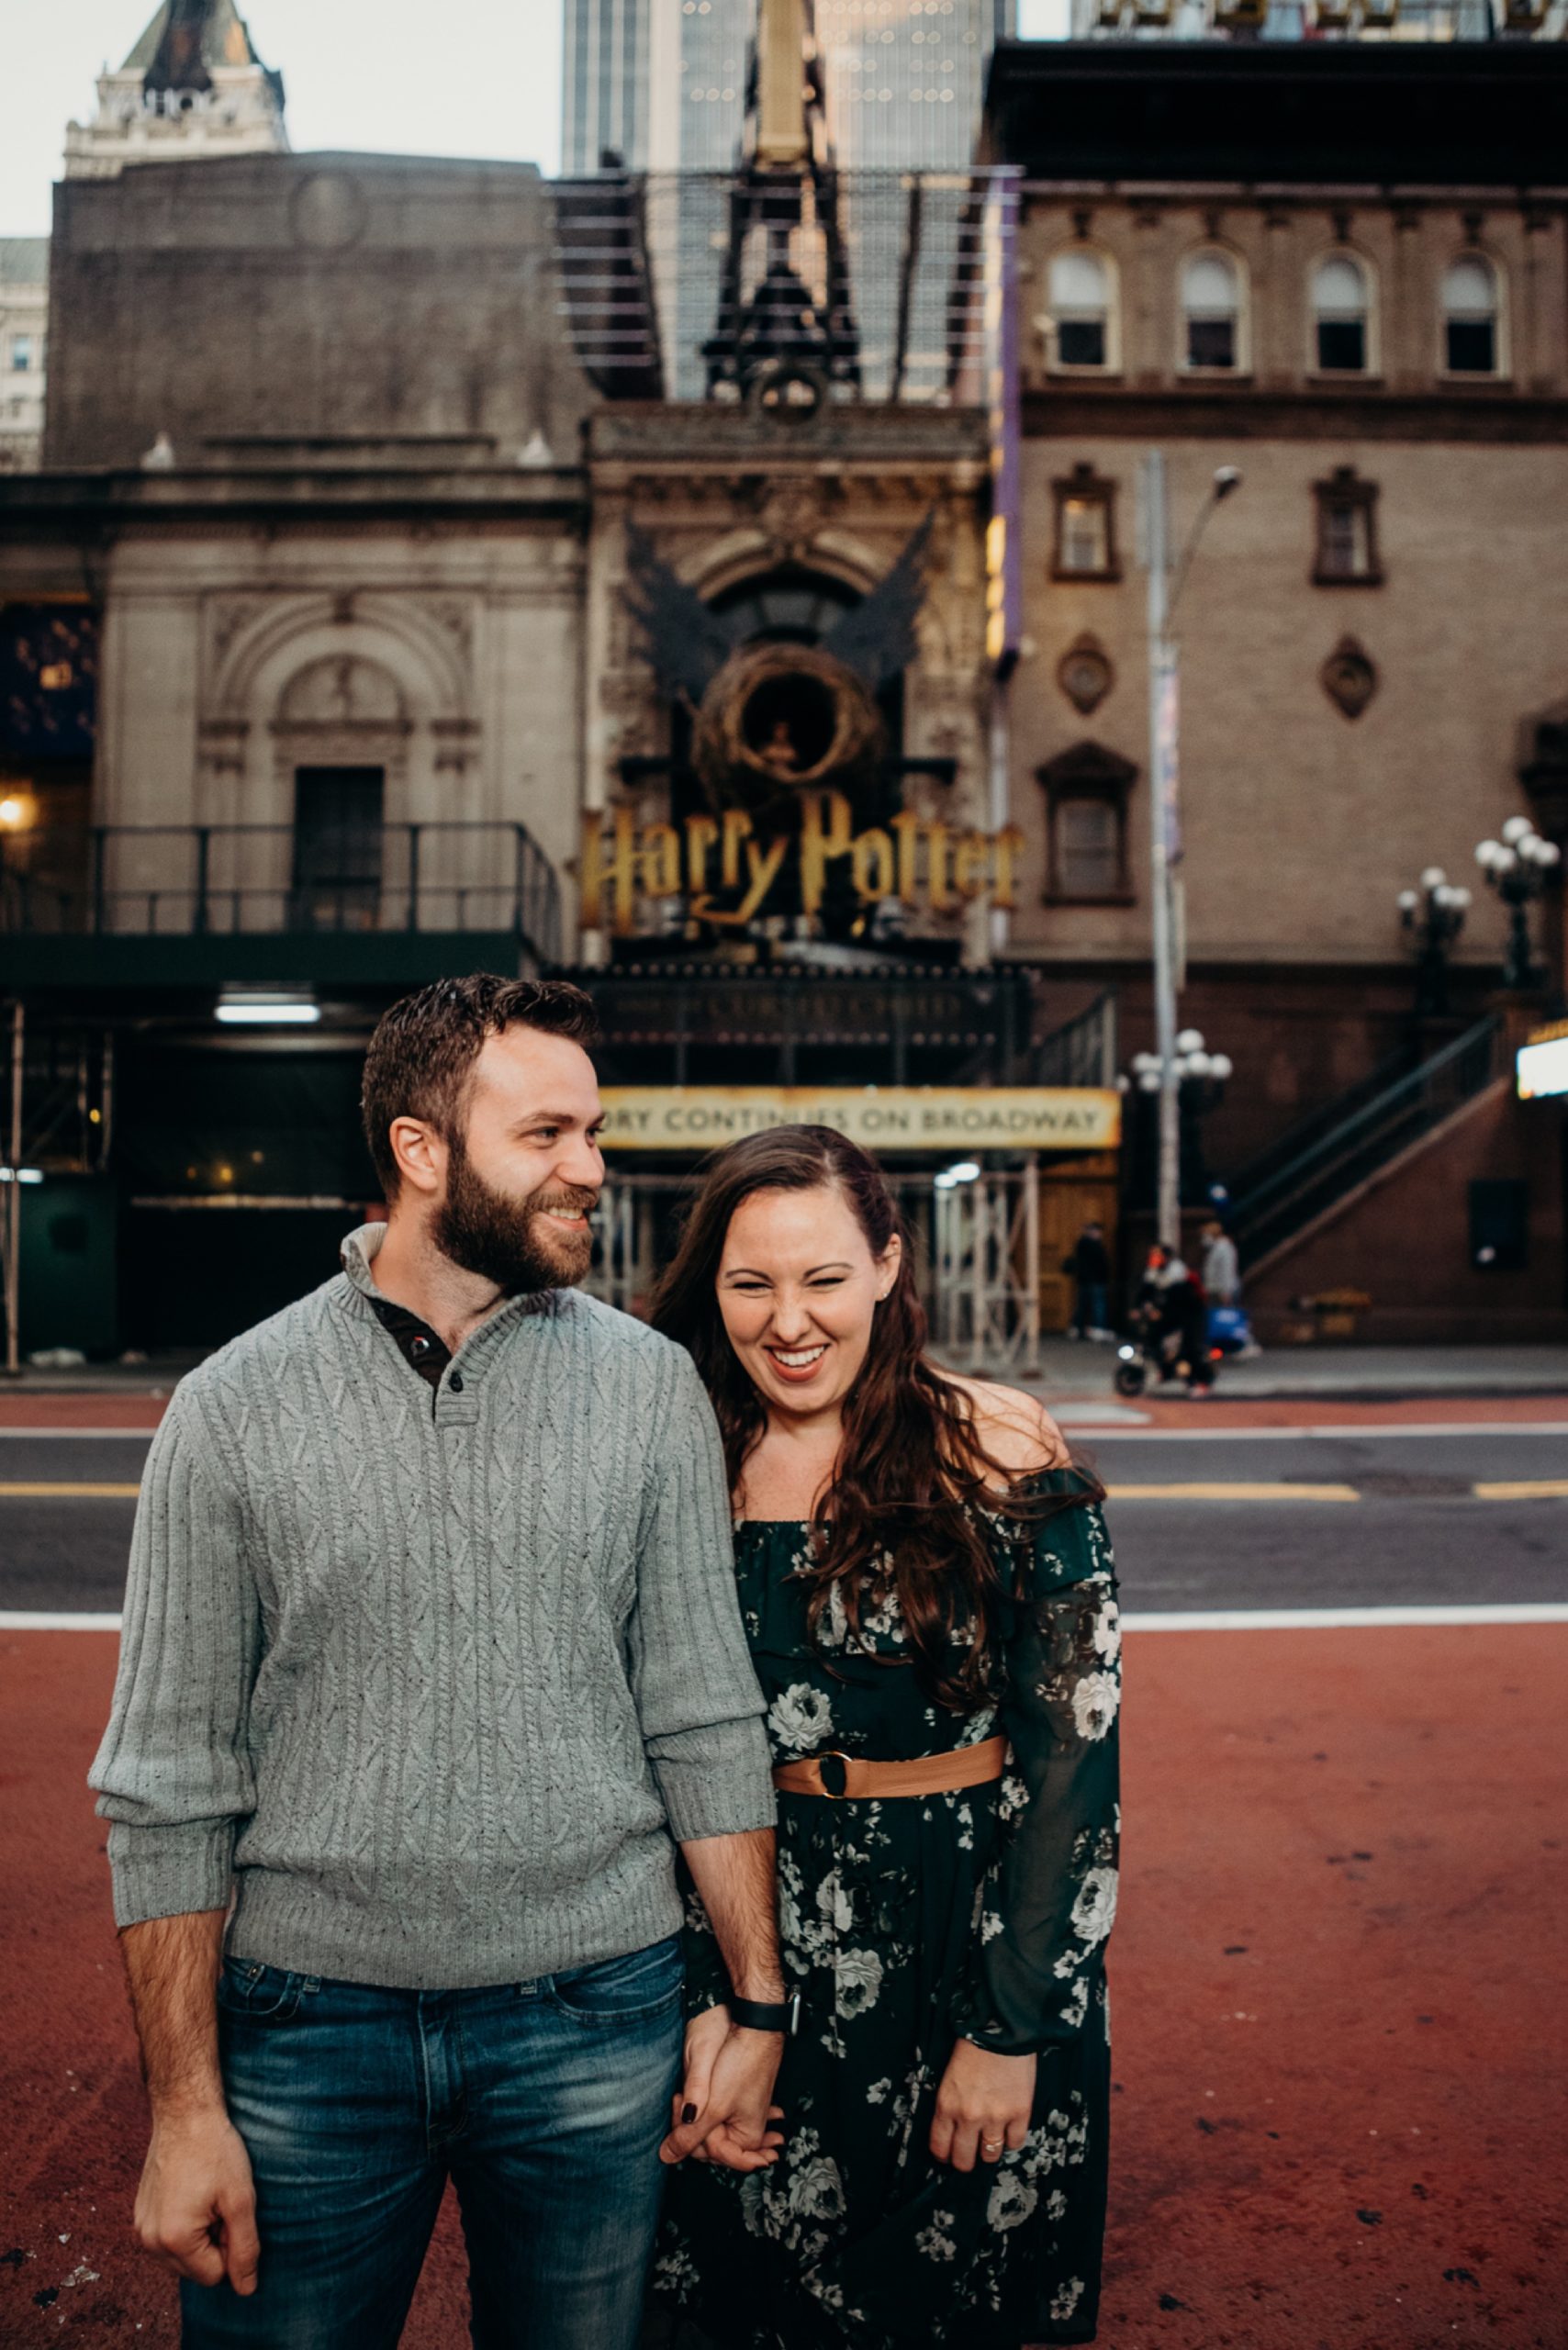 engagement photos of a couple in front of the lyric theater in times square, new york city